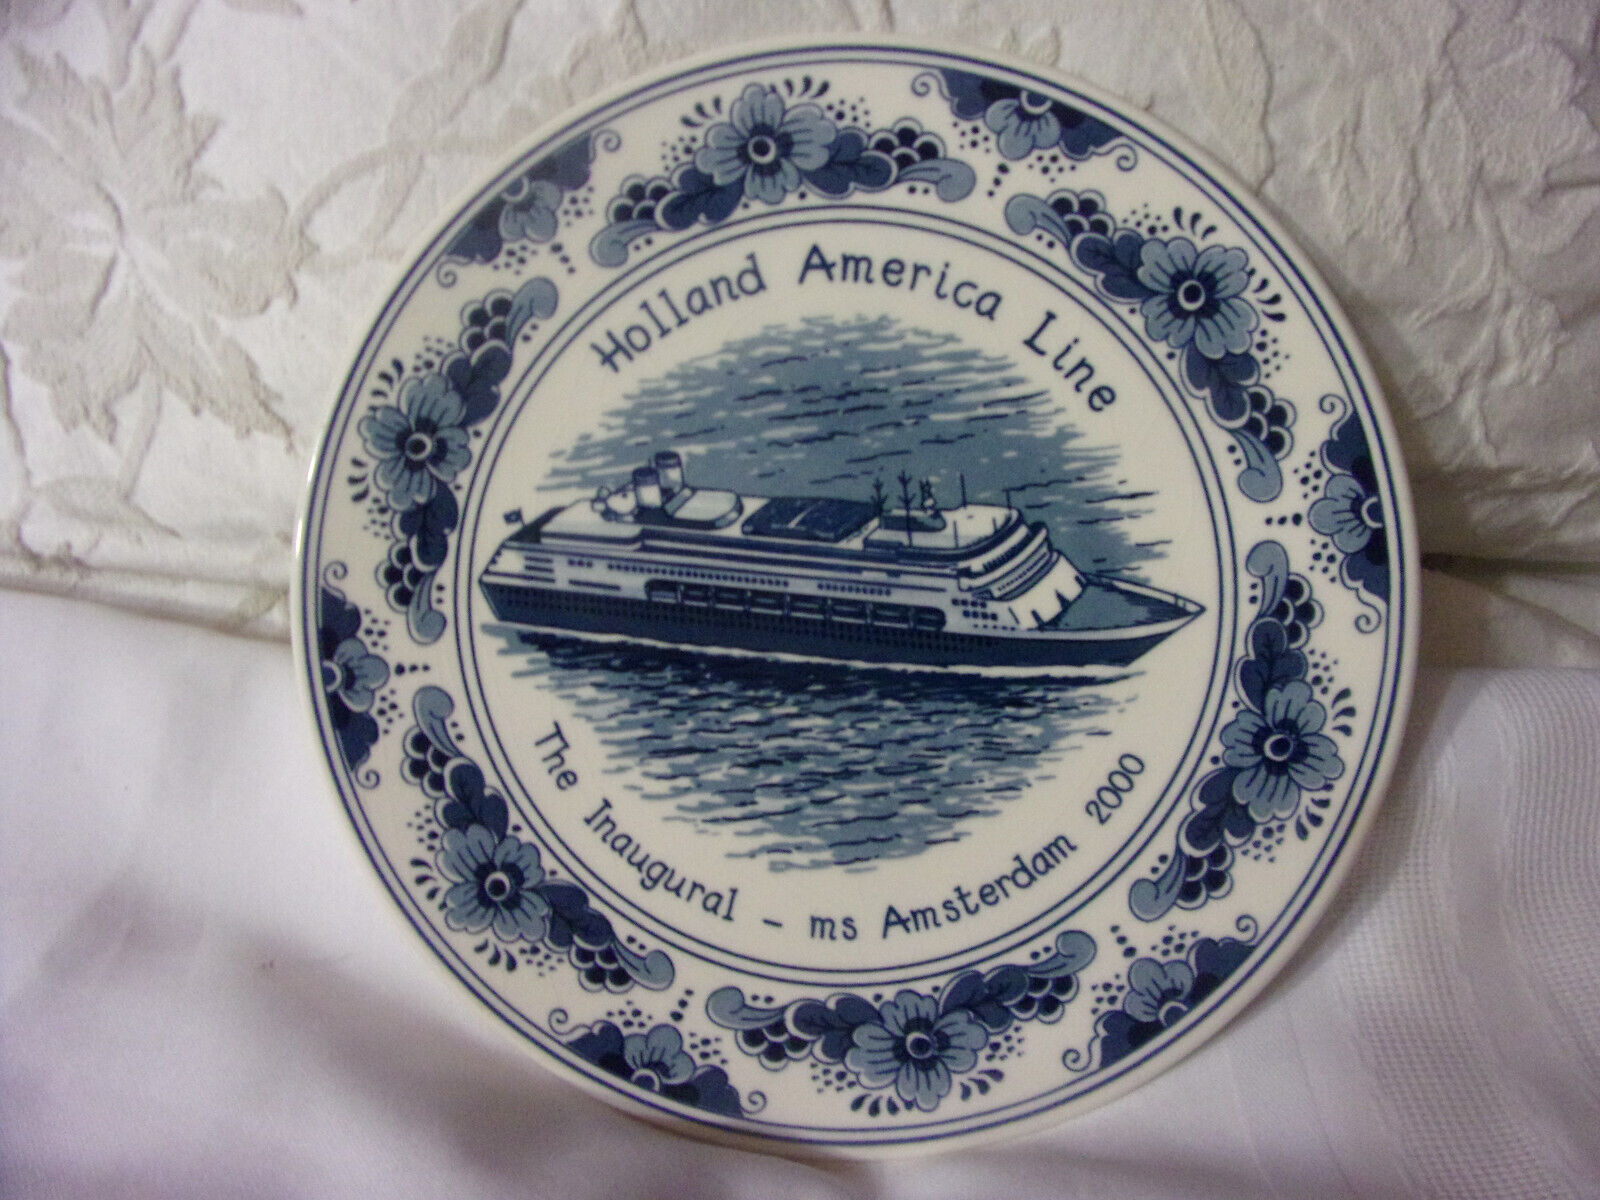 Holland America Line The Inaugural Ms- Amsterdam 2000 Blauw Delft Plate, Holland